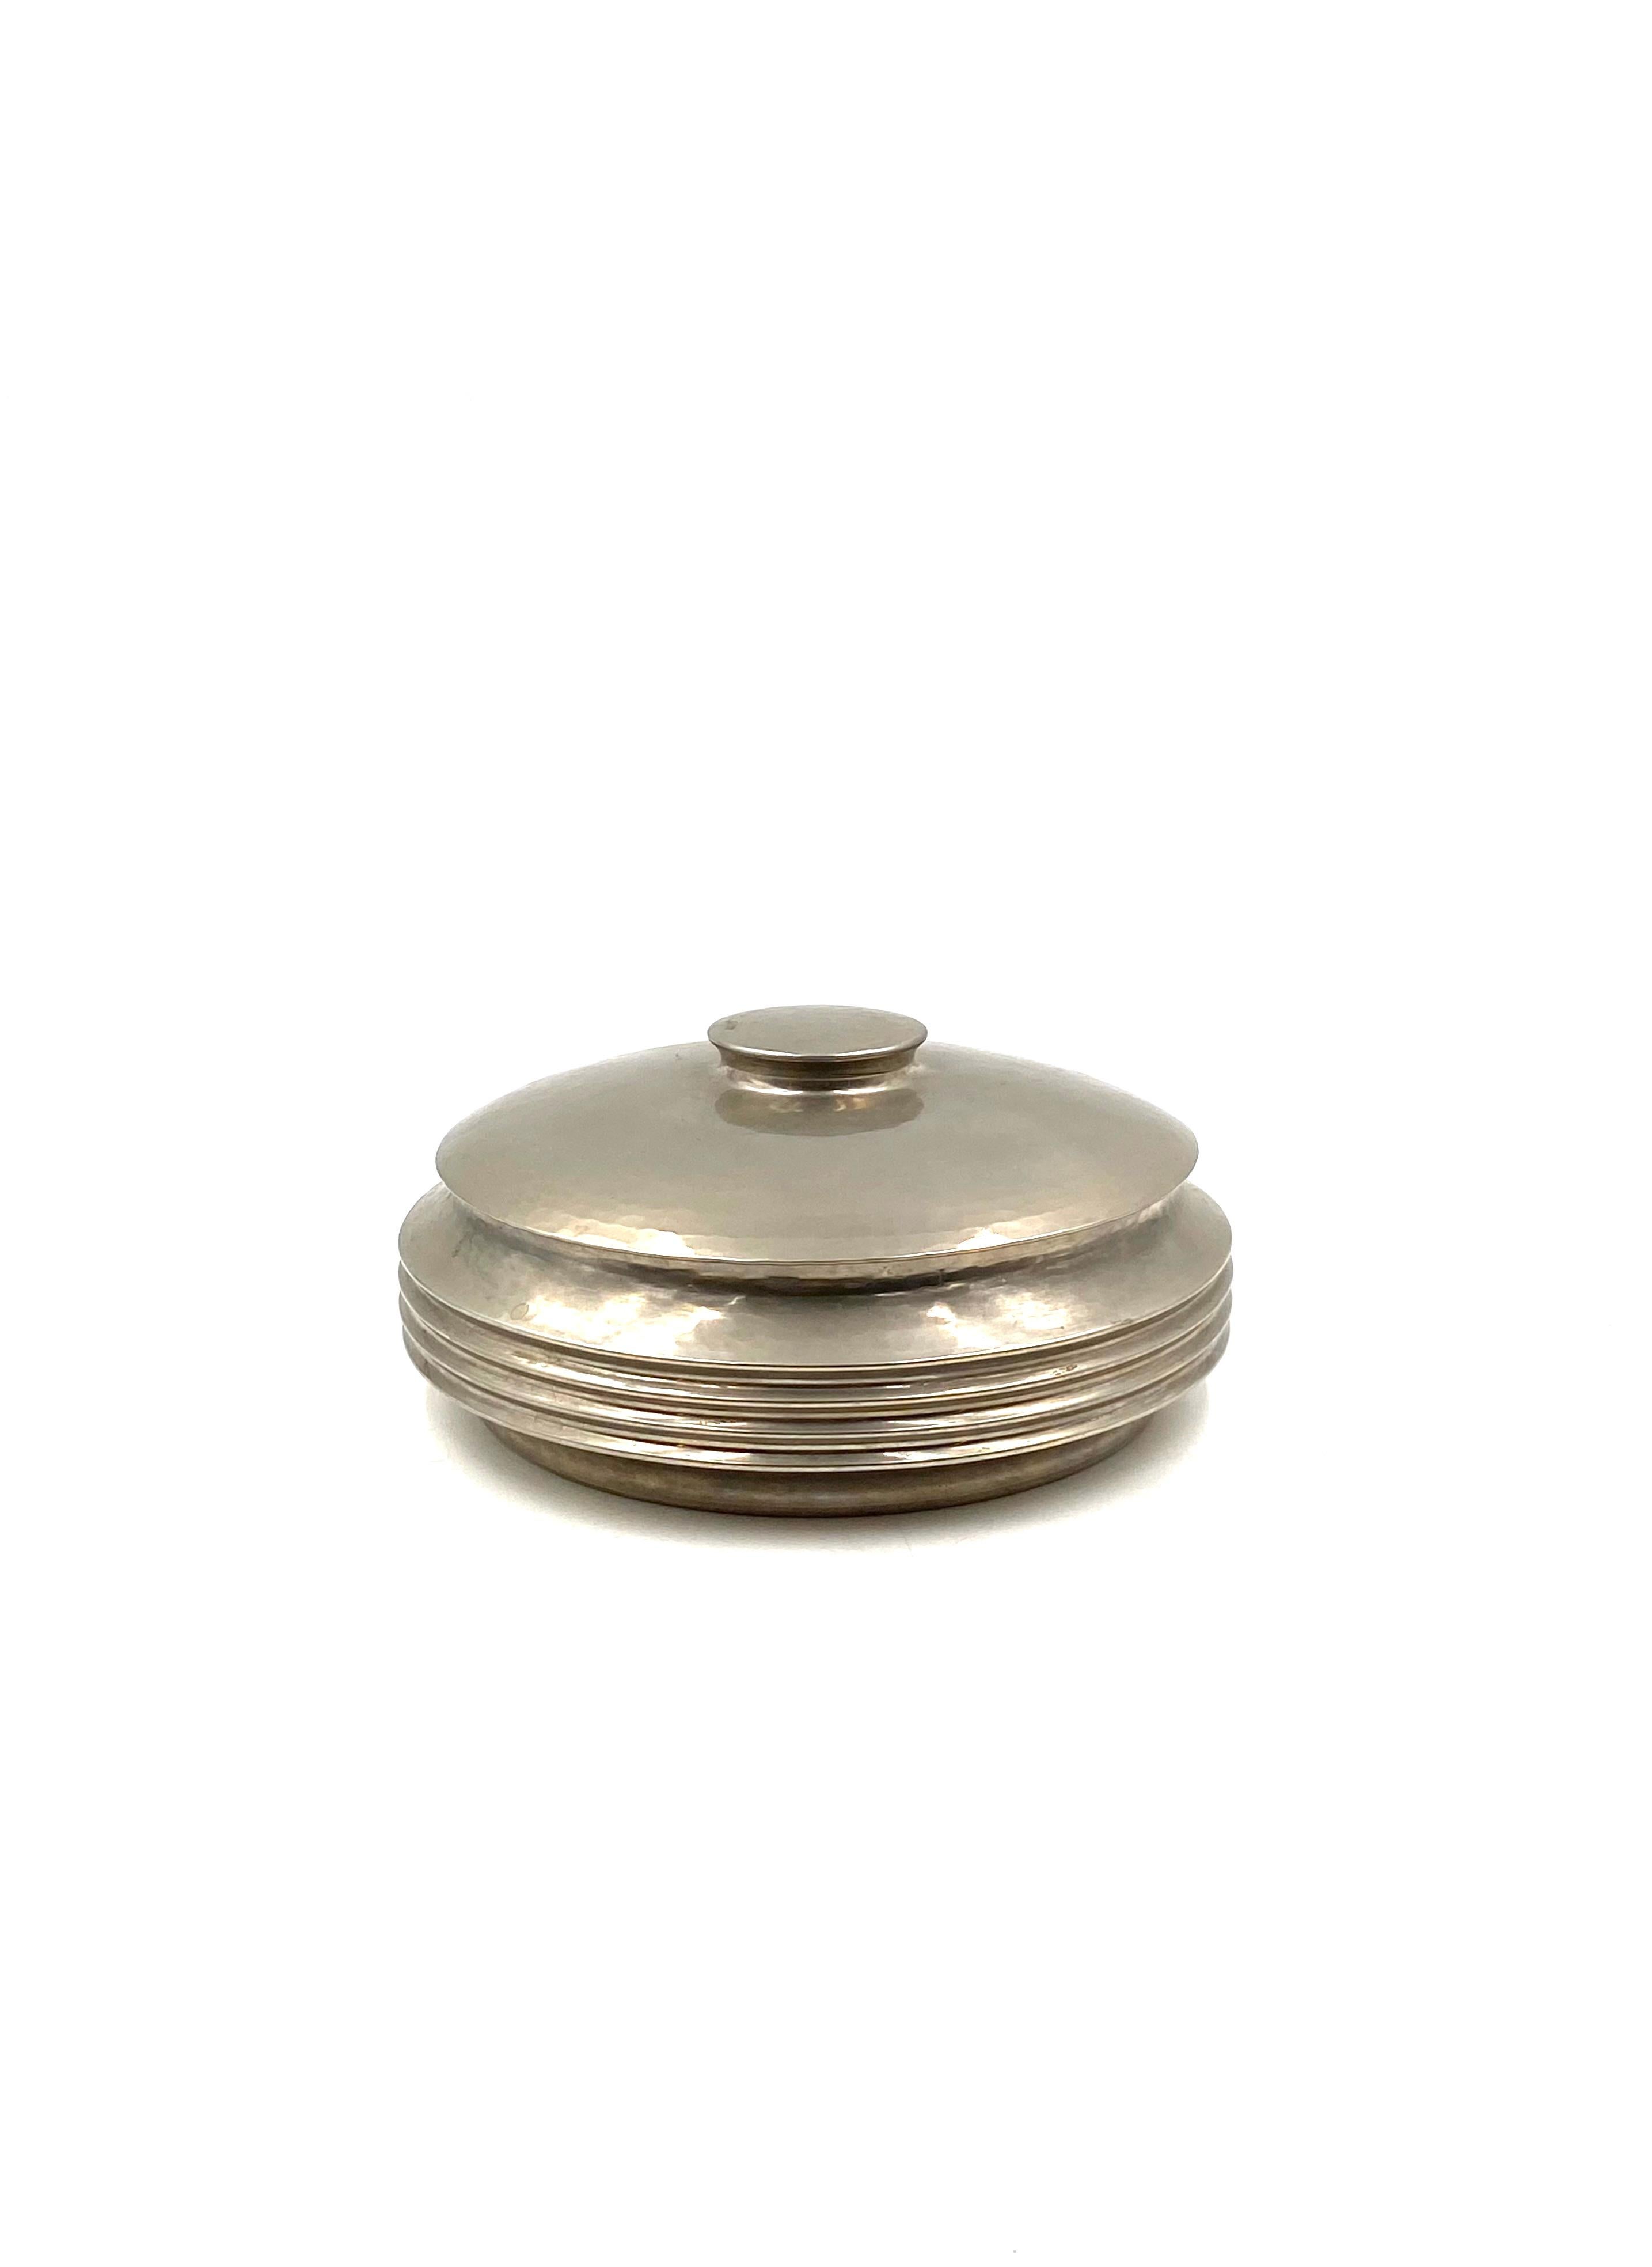 Italian Midcentury silver-plated hand-hammered brass box, Zanetto Padova Italy 1970s For Sale